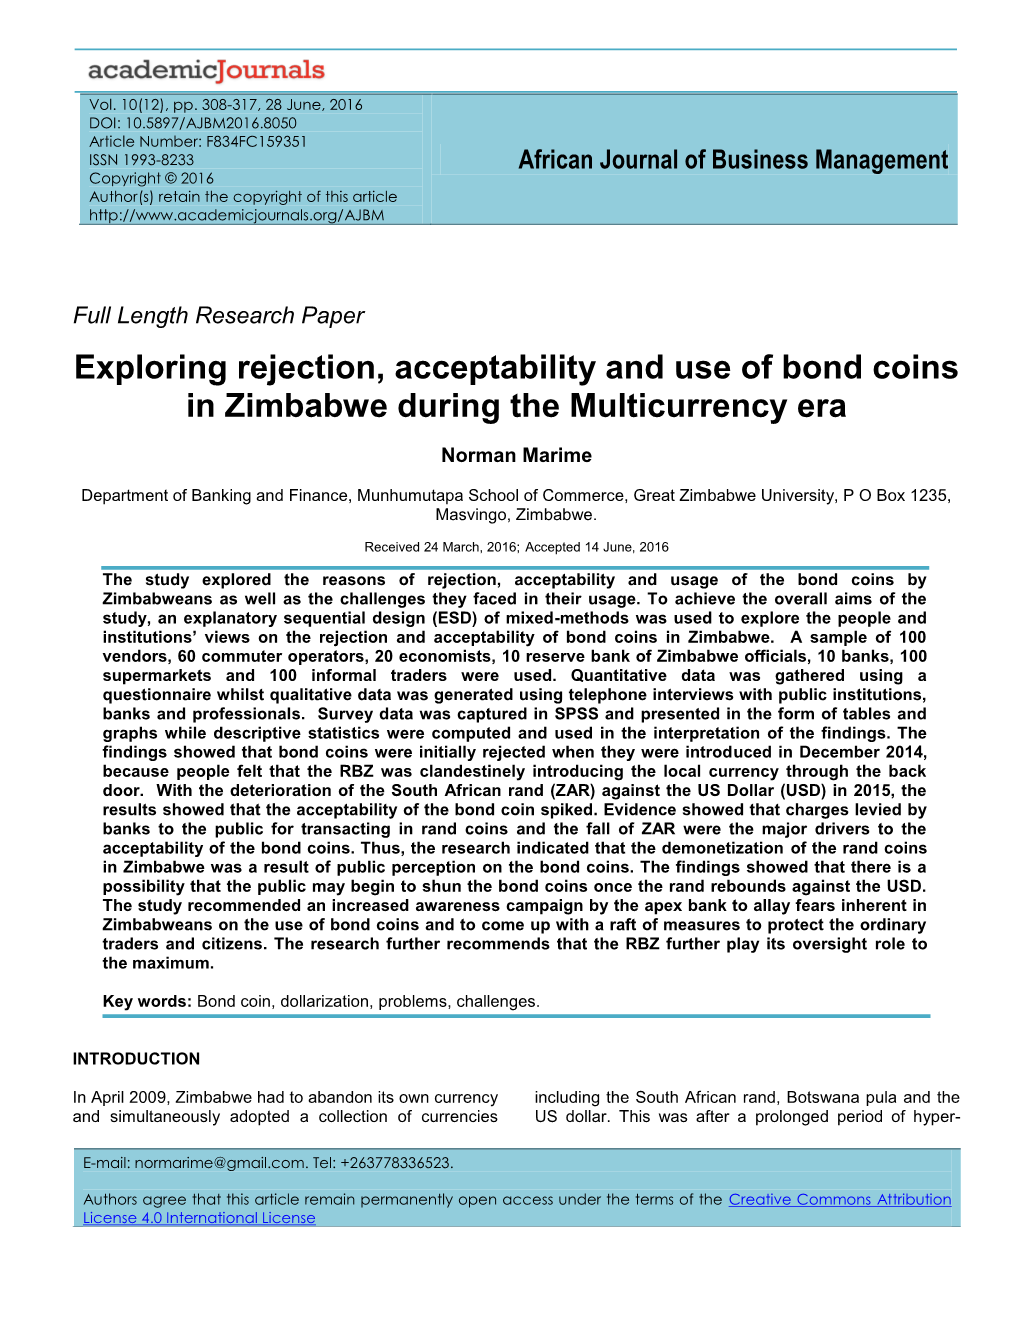 Exploring Rejection, Acceptability and Use of Bond Coins in Zimbabwe During the Multicurrency Era